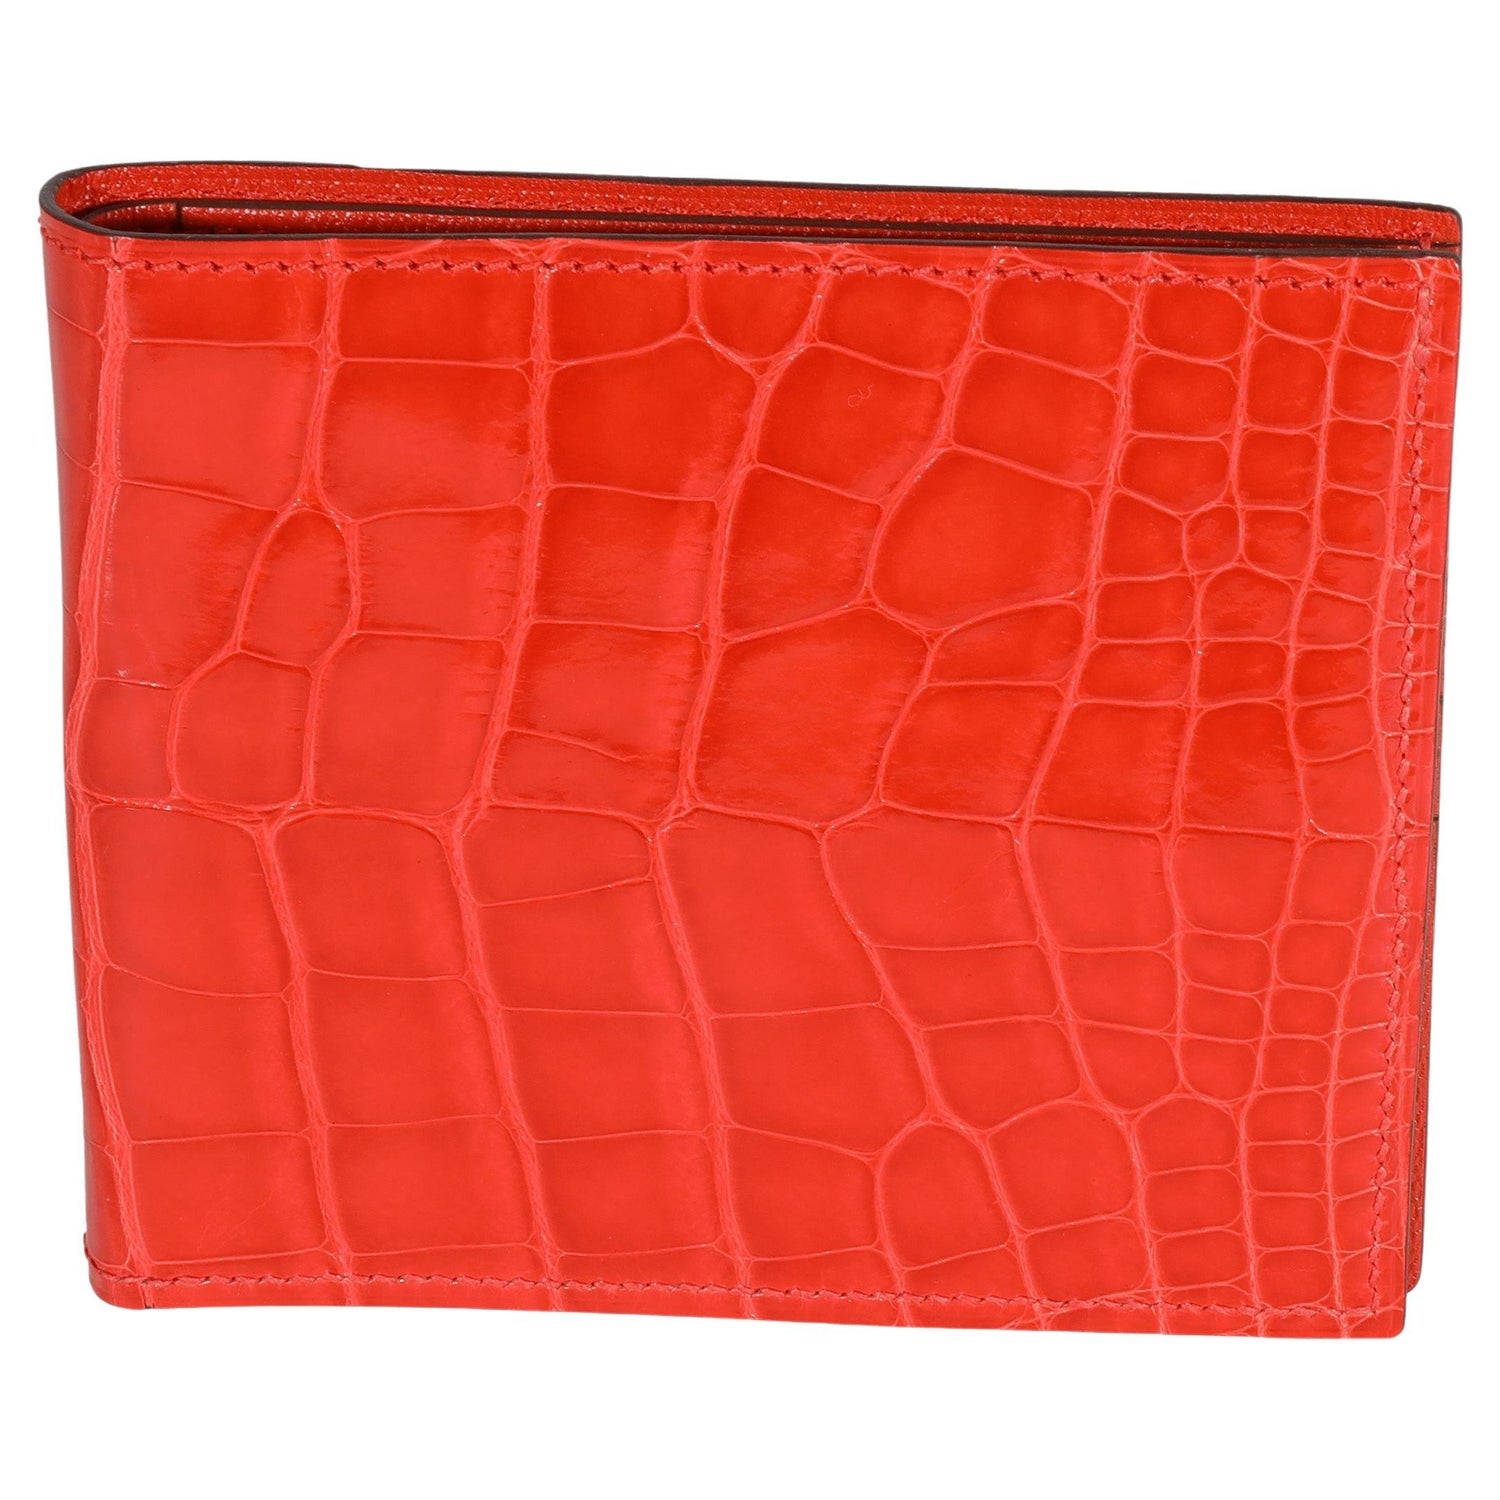 Louis Vuitton 2008 Vernis Rayures Pattern Wallet - Red Wallets, Accessories  - LOU804359